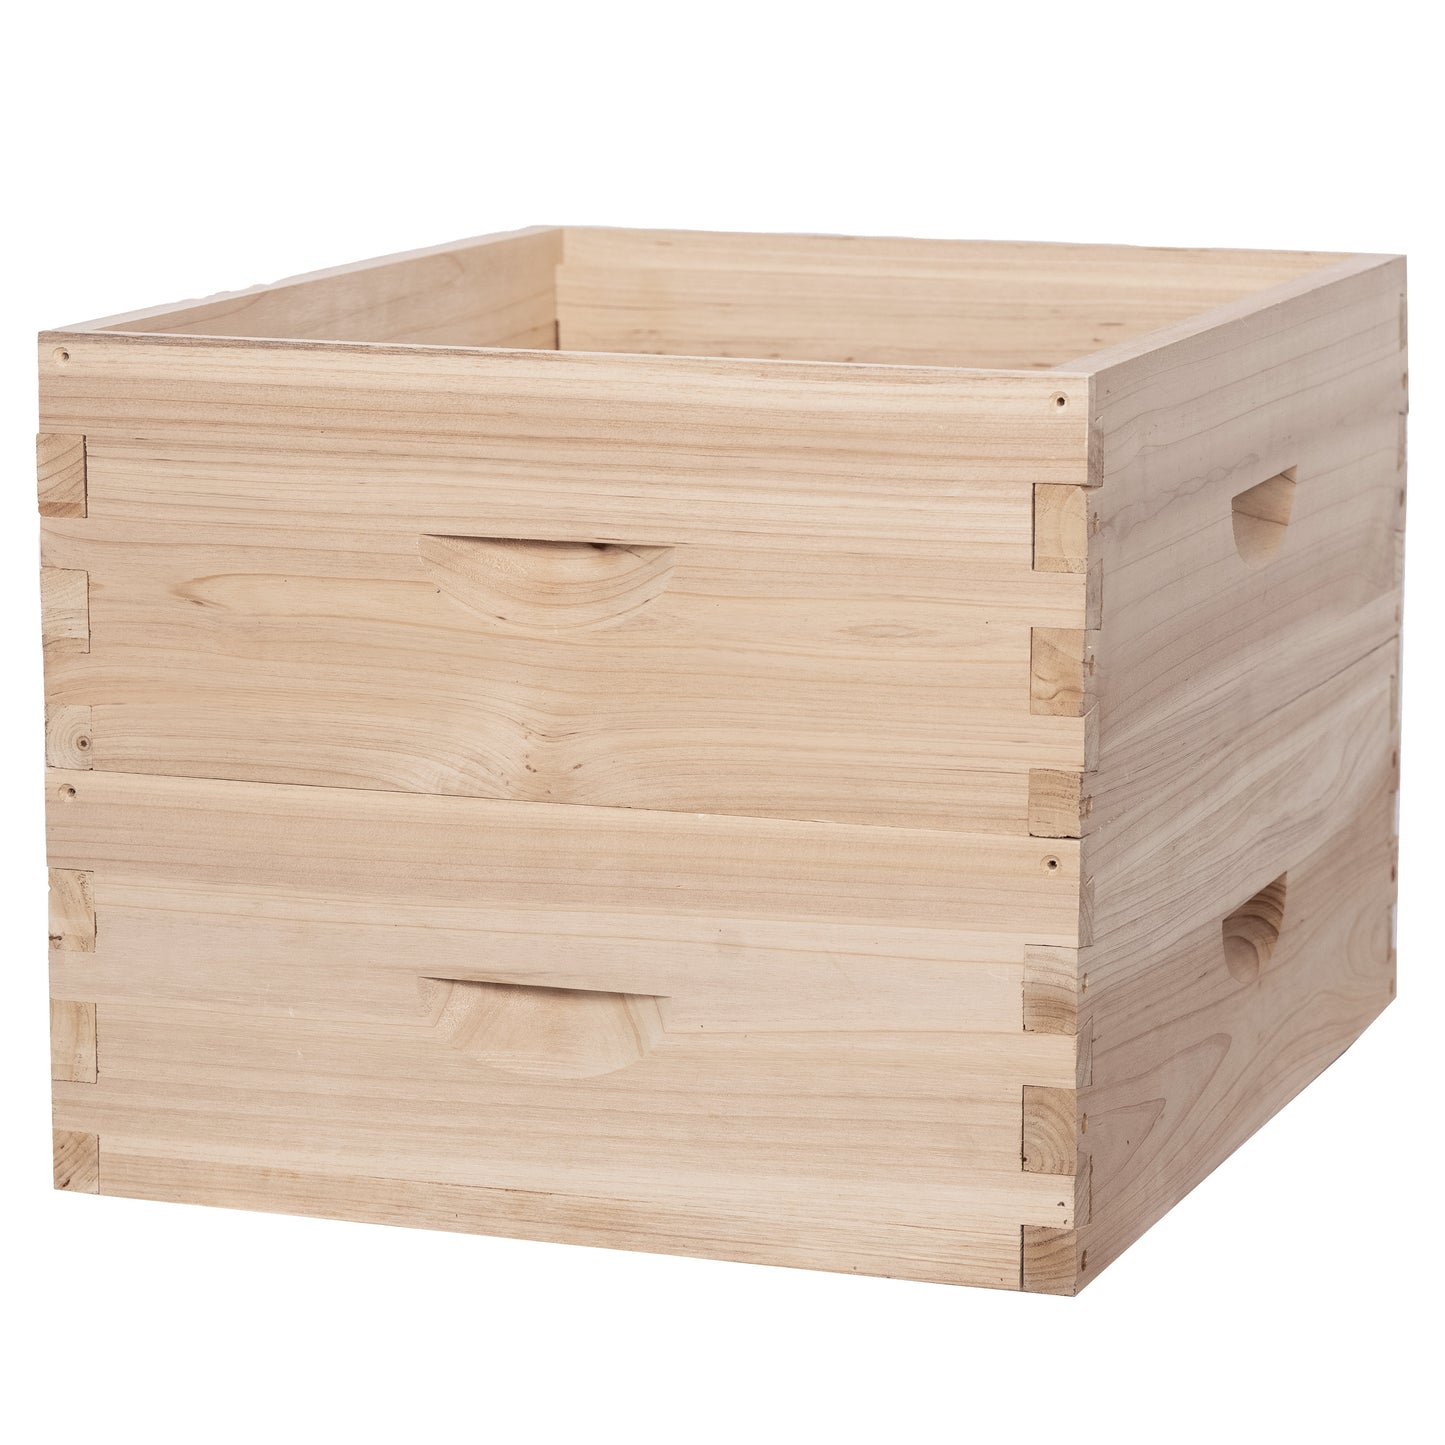 BeeCastle Hives Unwax 10 Frame Super Box Hive Body:Frameless, Logo Free, Wax Free, Crafted with Cedar Wood and Dovetail Joint Precision! 🌲 Elevate Your Beekeeping with Pure Excellence